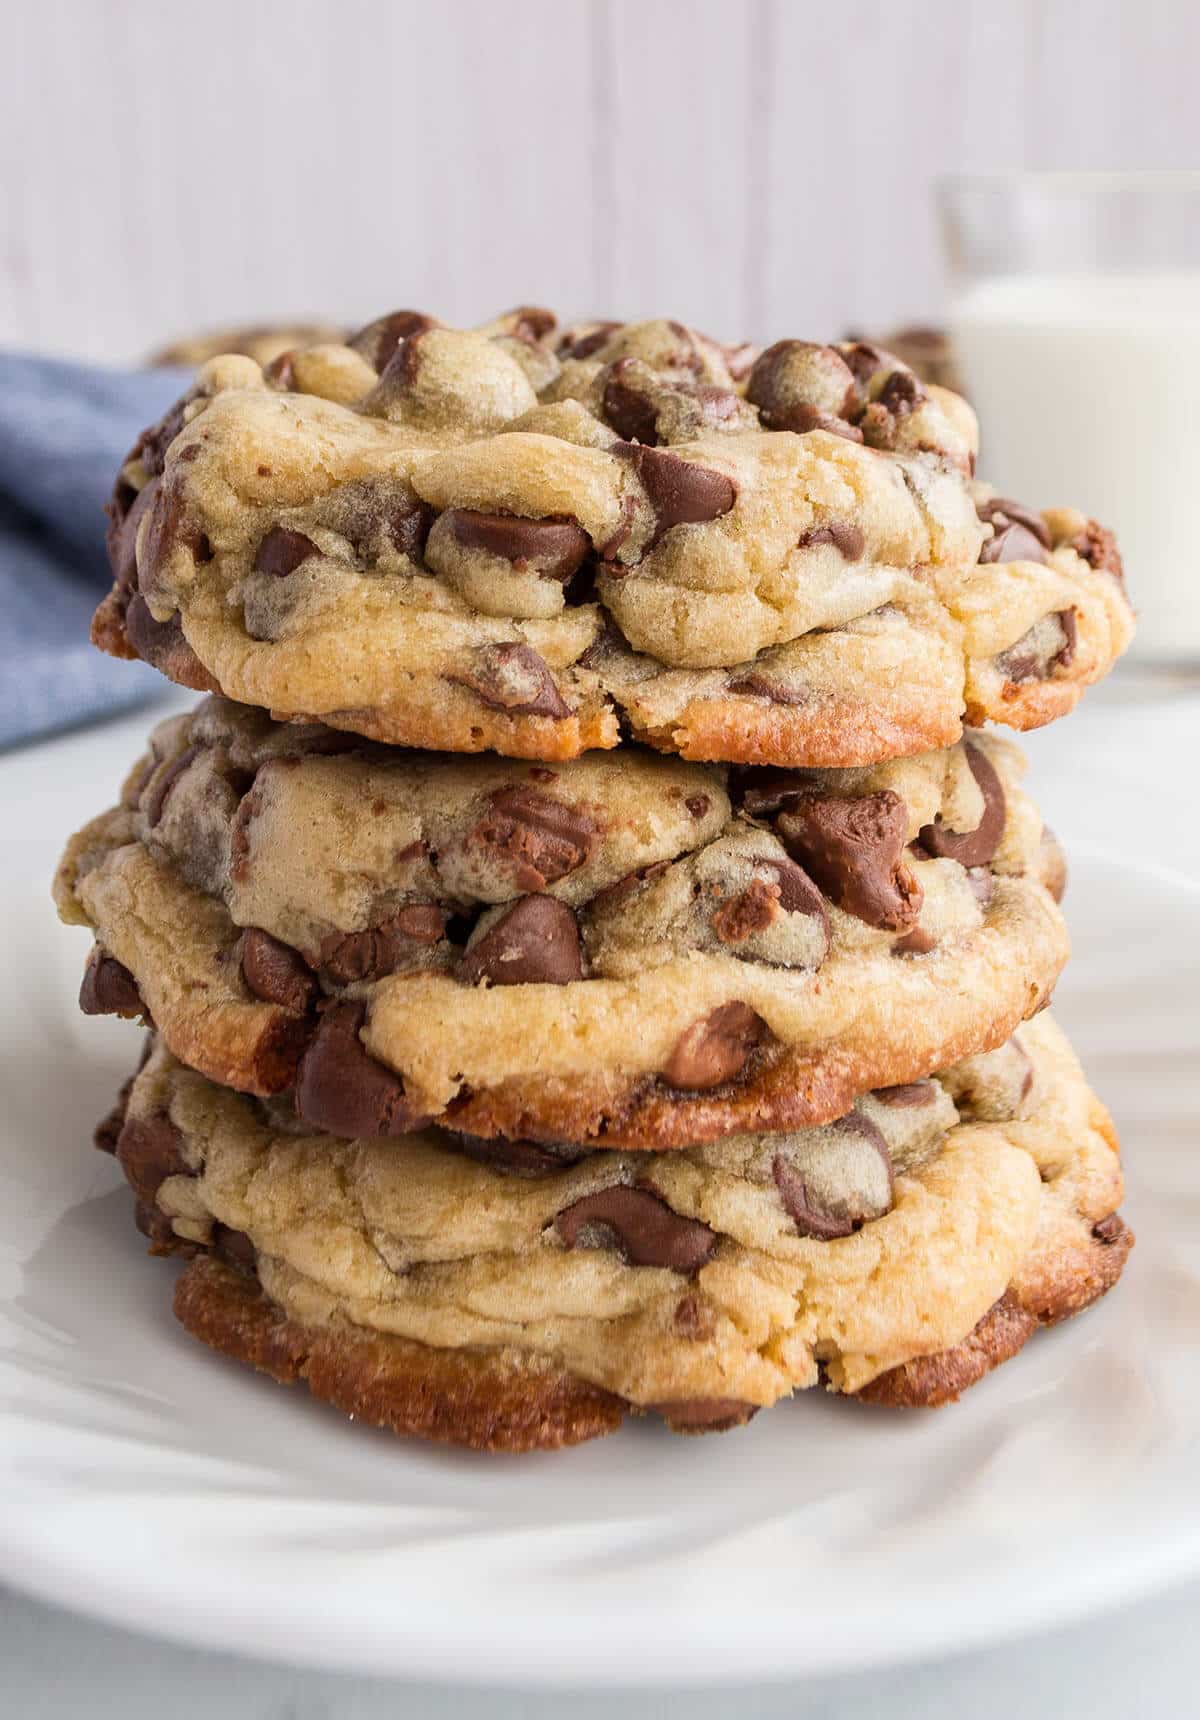 A stack of baked chocolate chip cookies